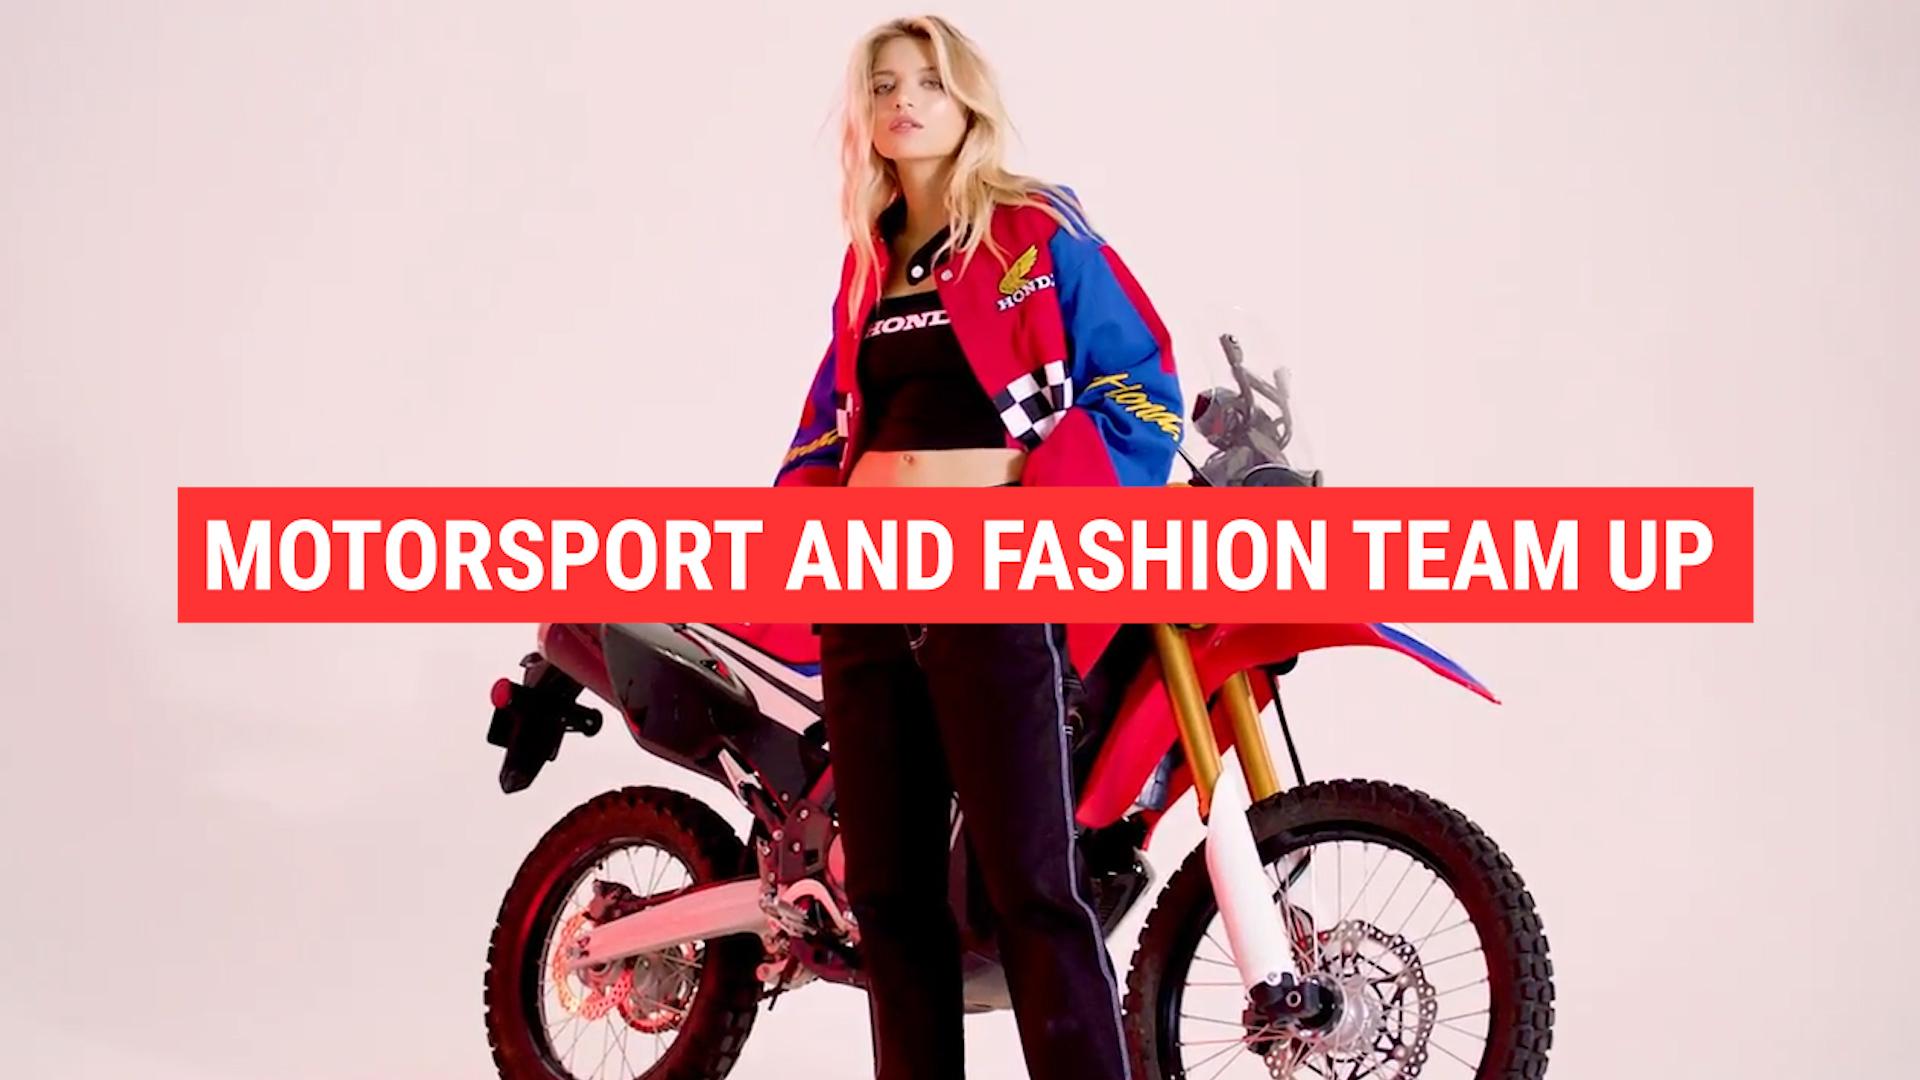 Honda Collabs with Forever 21 - Honda Fashion!